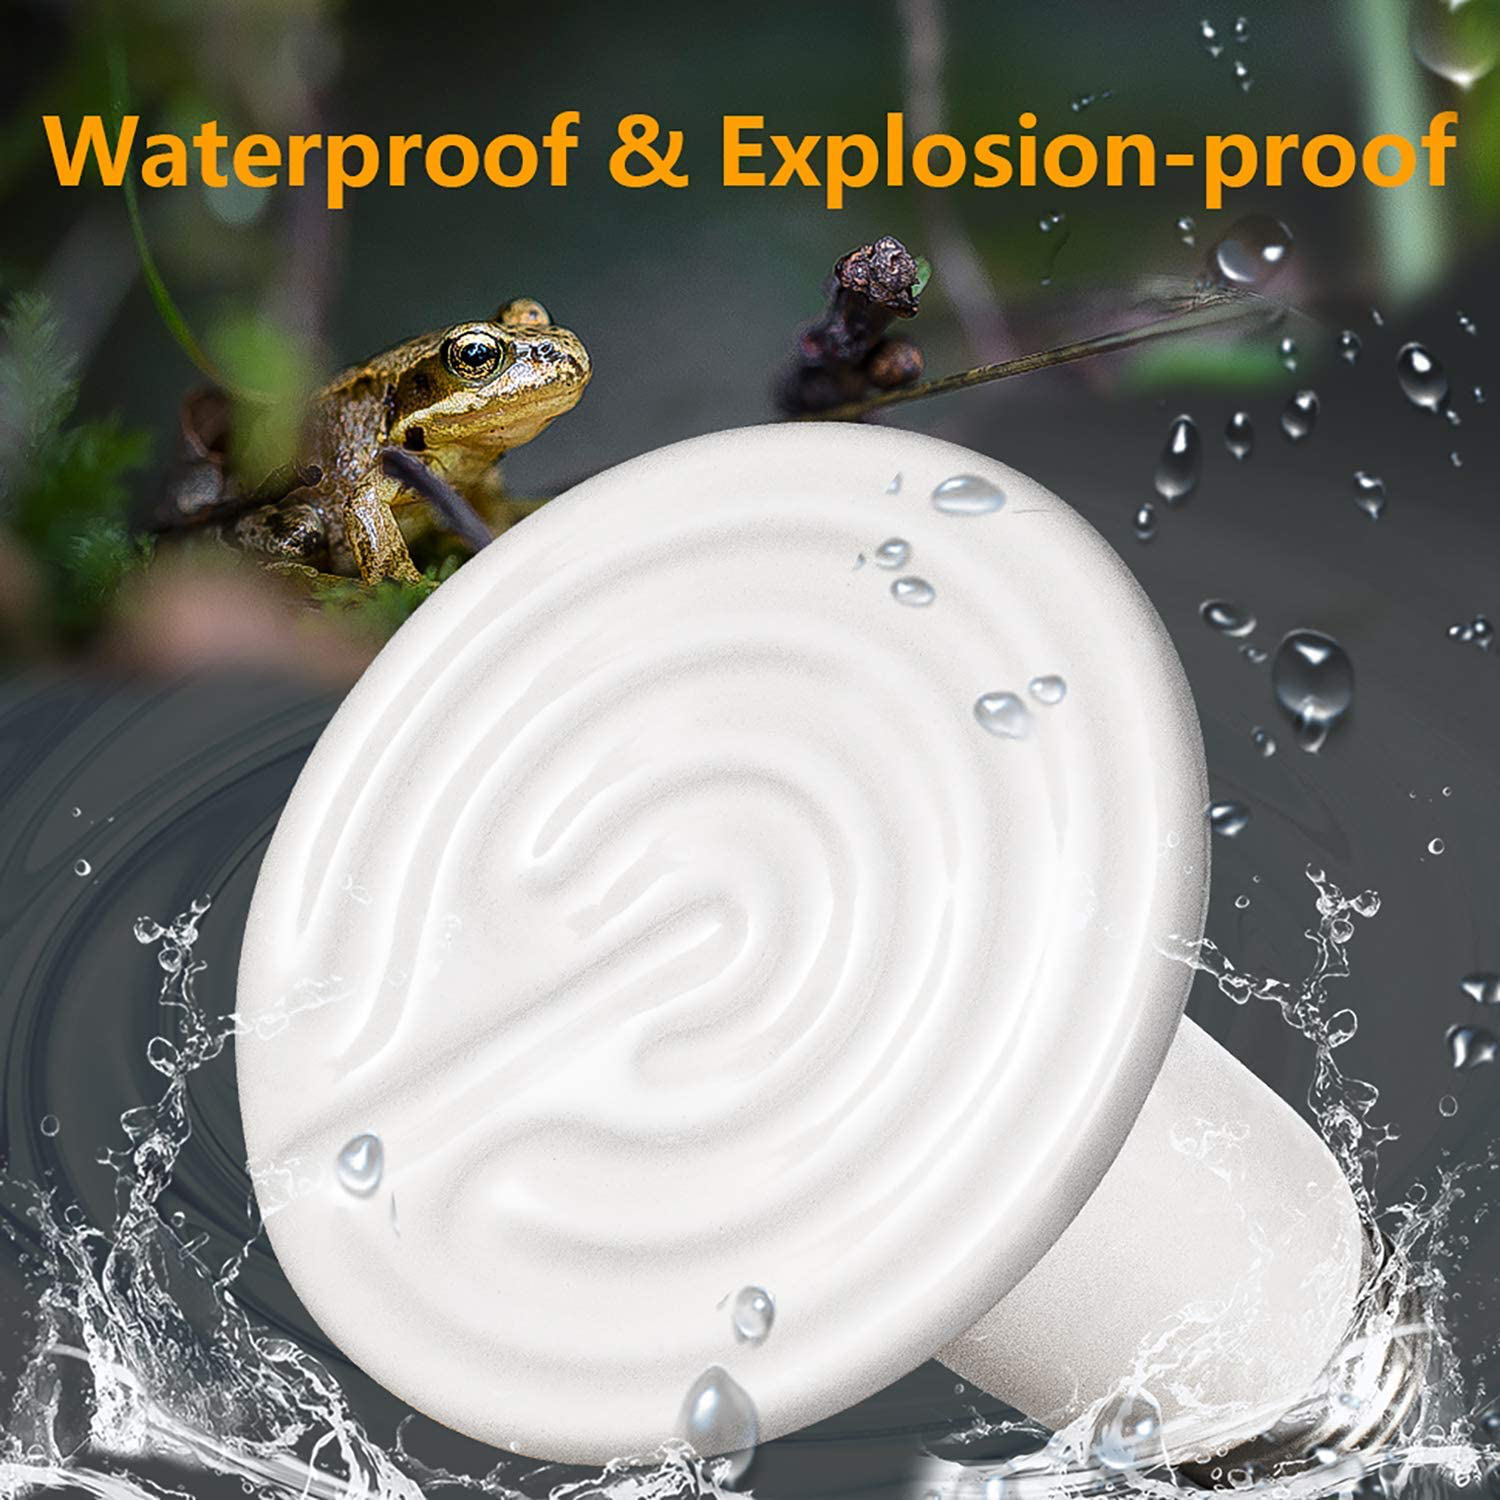 BOEESPAT 60W/100W/150W 2 Pack Ceramic Heat Emitter Bulb, Reptile Heat Lamp Brooder Coop Pet No Light No Harm for Pets Amphibians Hamsters Snakes Birds Poultry Chicken Coop Habitats (White) Animals & Pet Supplies > Pet Supplies > Reptile & Amphibian Supplies > Reptile & Amphibian Habitats BOEESPAT   